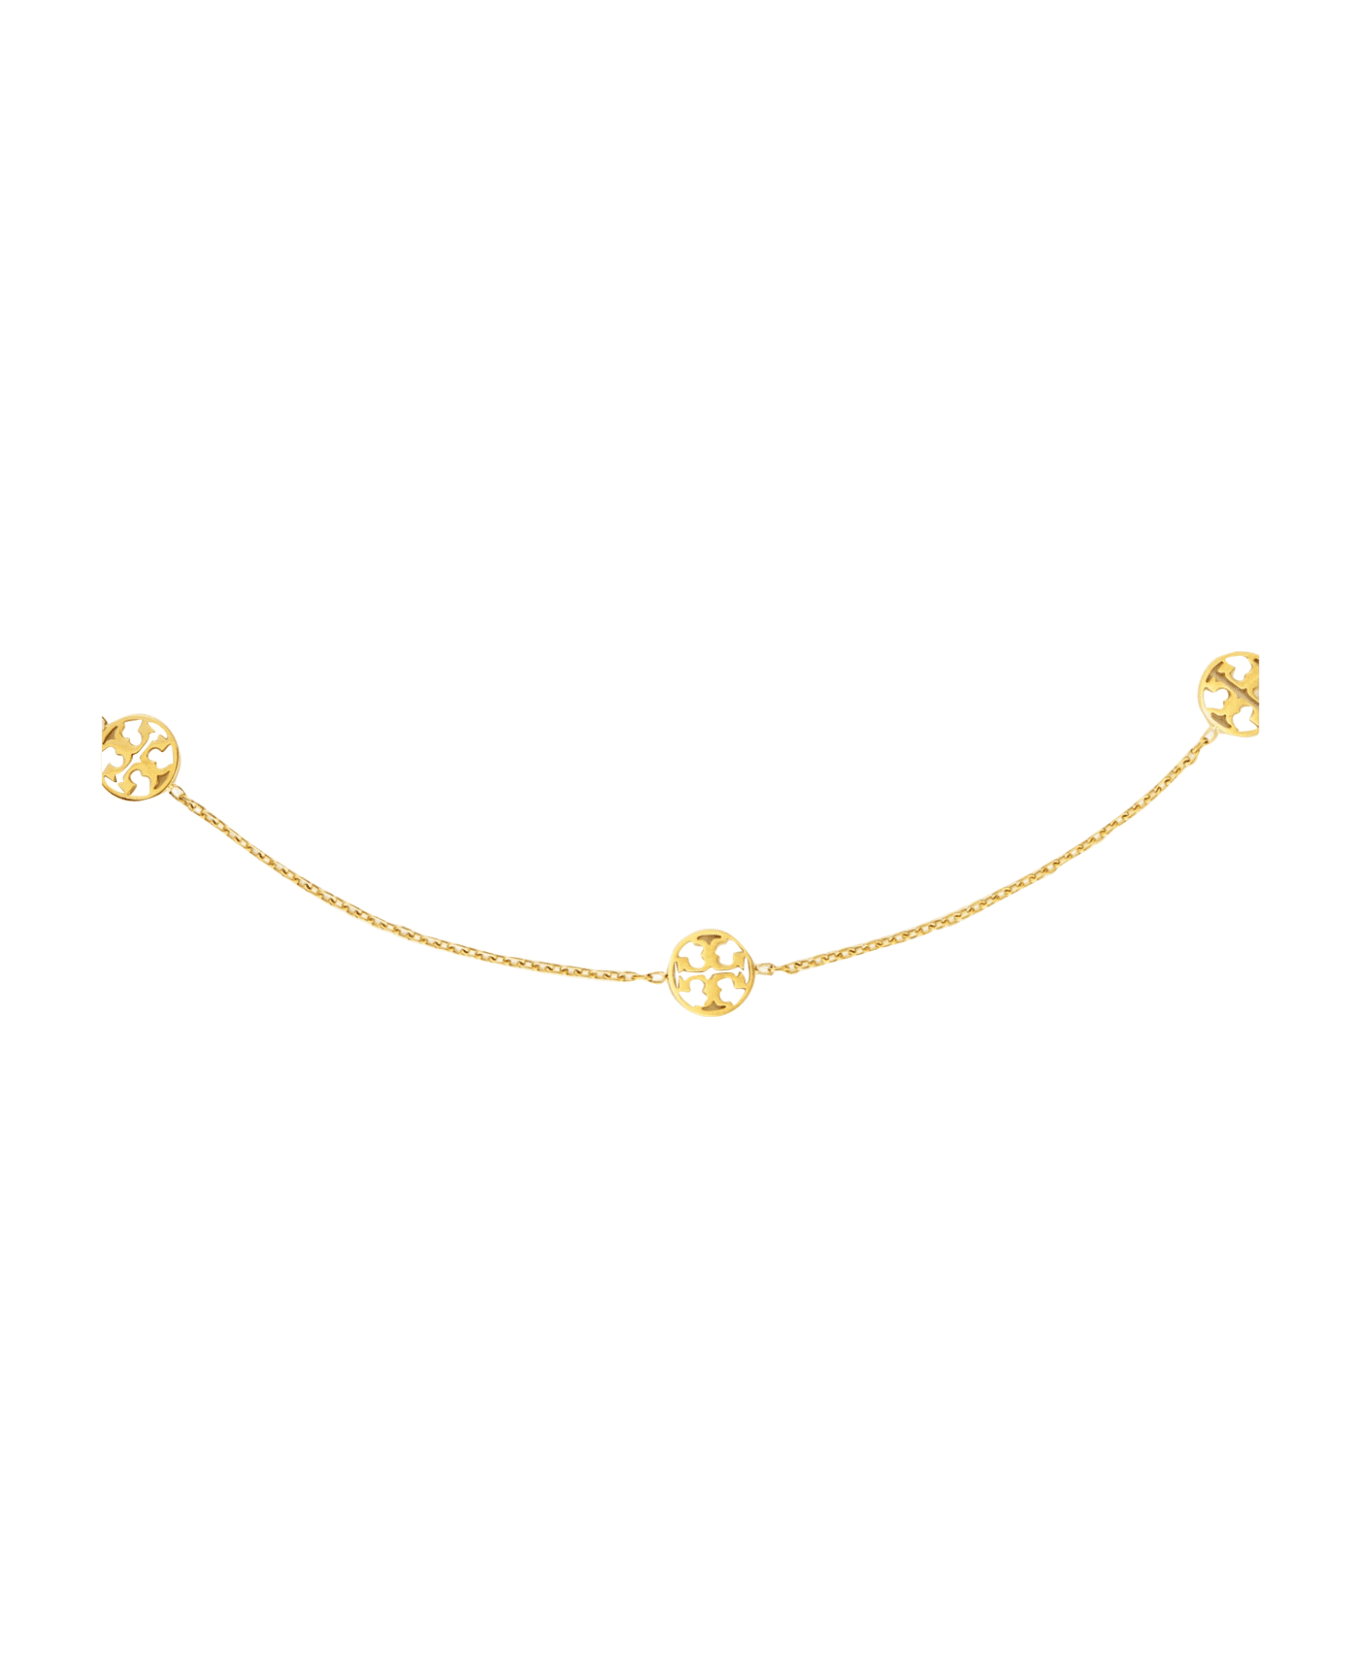 Tory Burch Miller Necklace - Golden ブレスレット